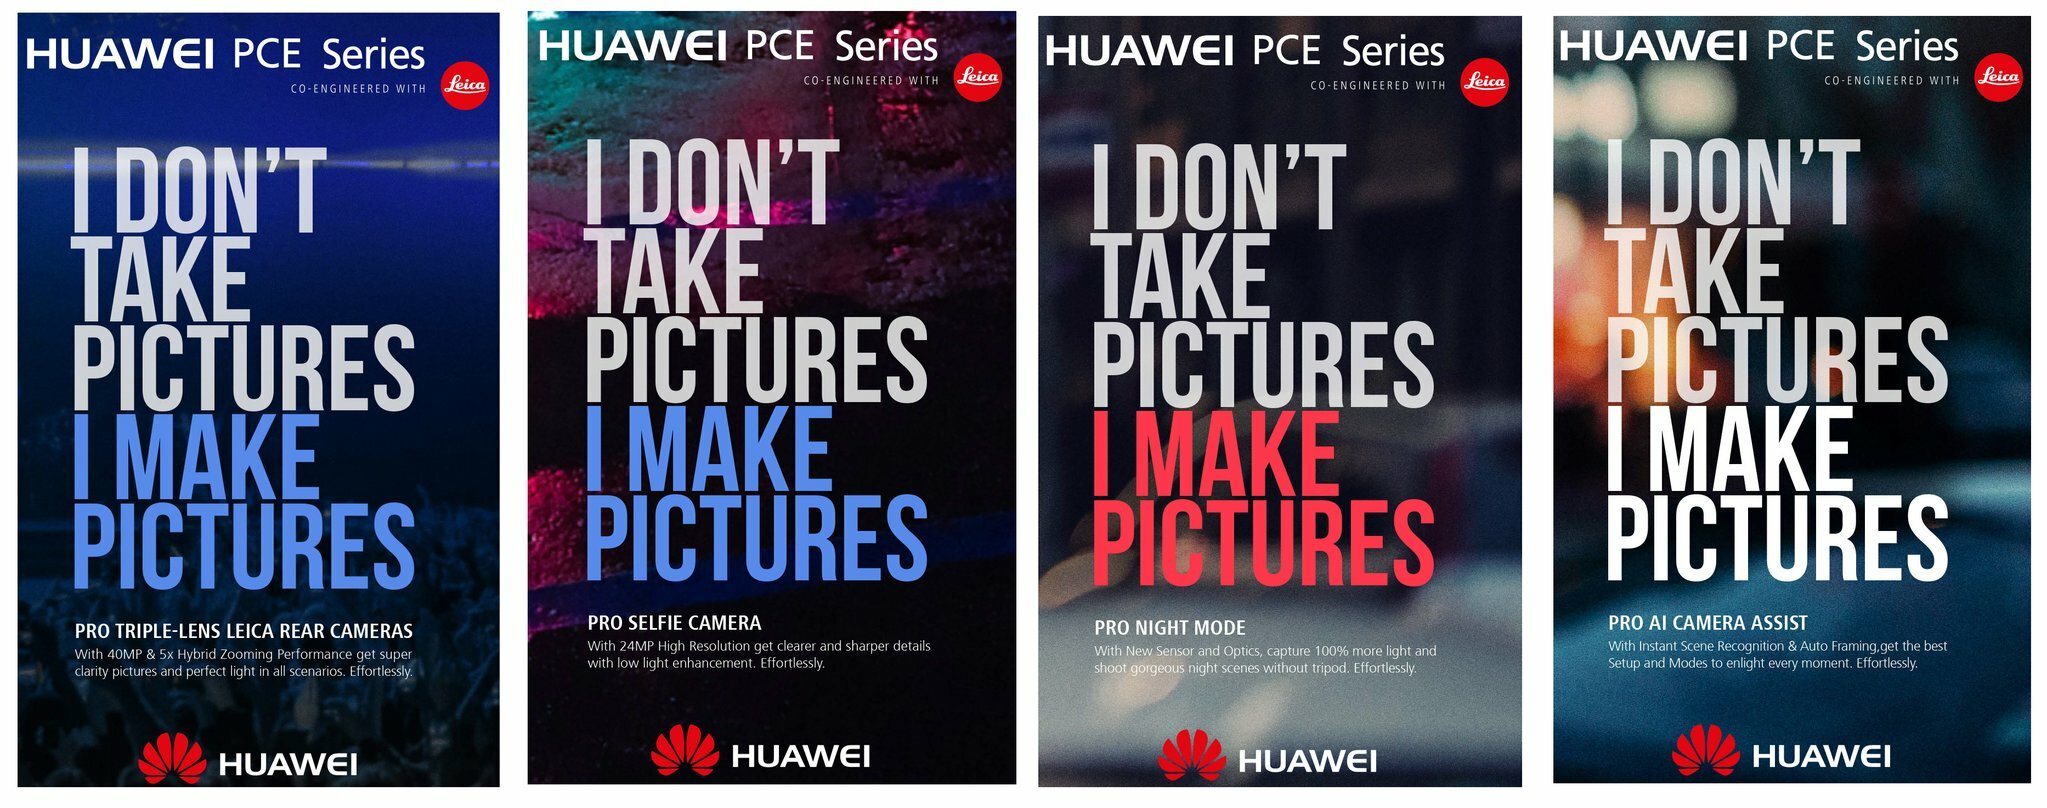 What kind of cameras will the Huawei P20 have?